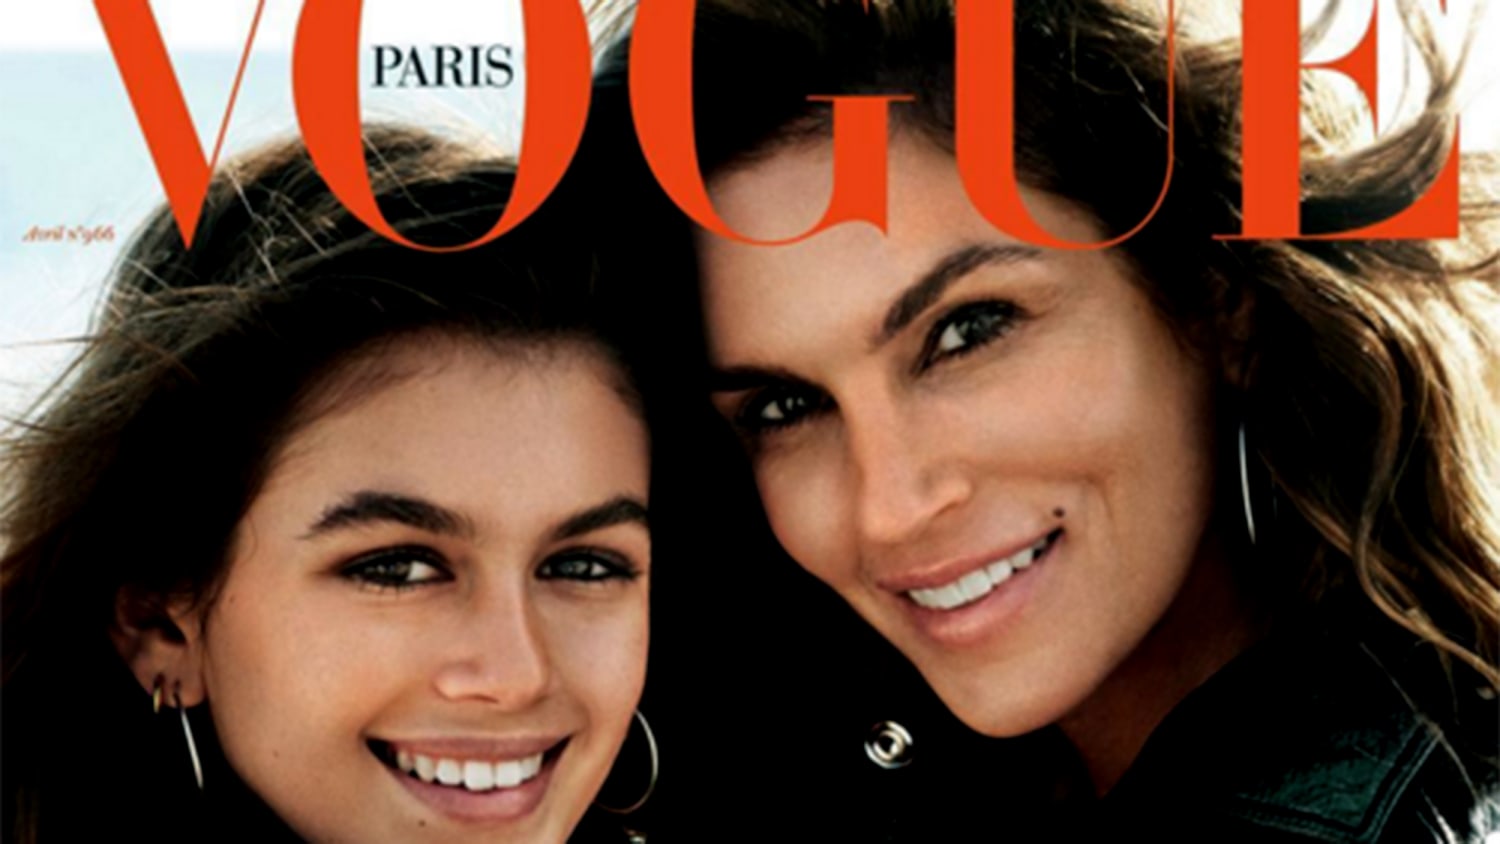 Cindy Crawford's daughter, Kaia Gerber, has signed with IMG Models